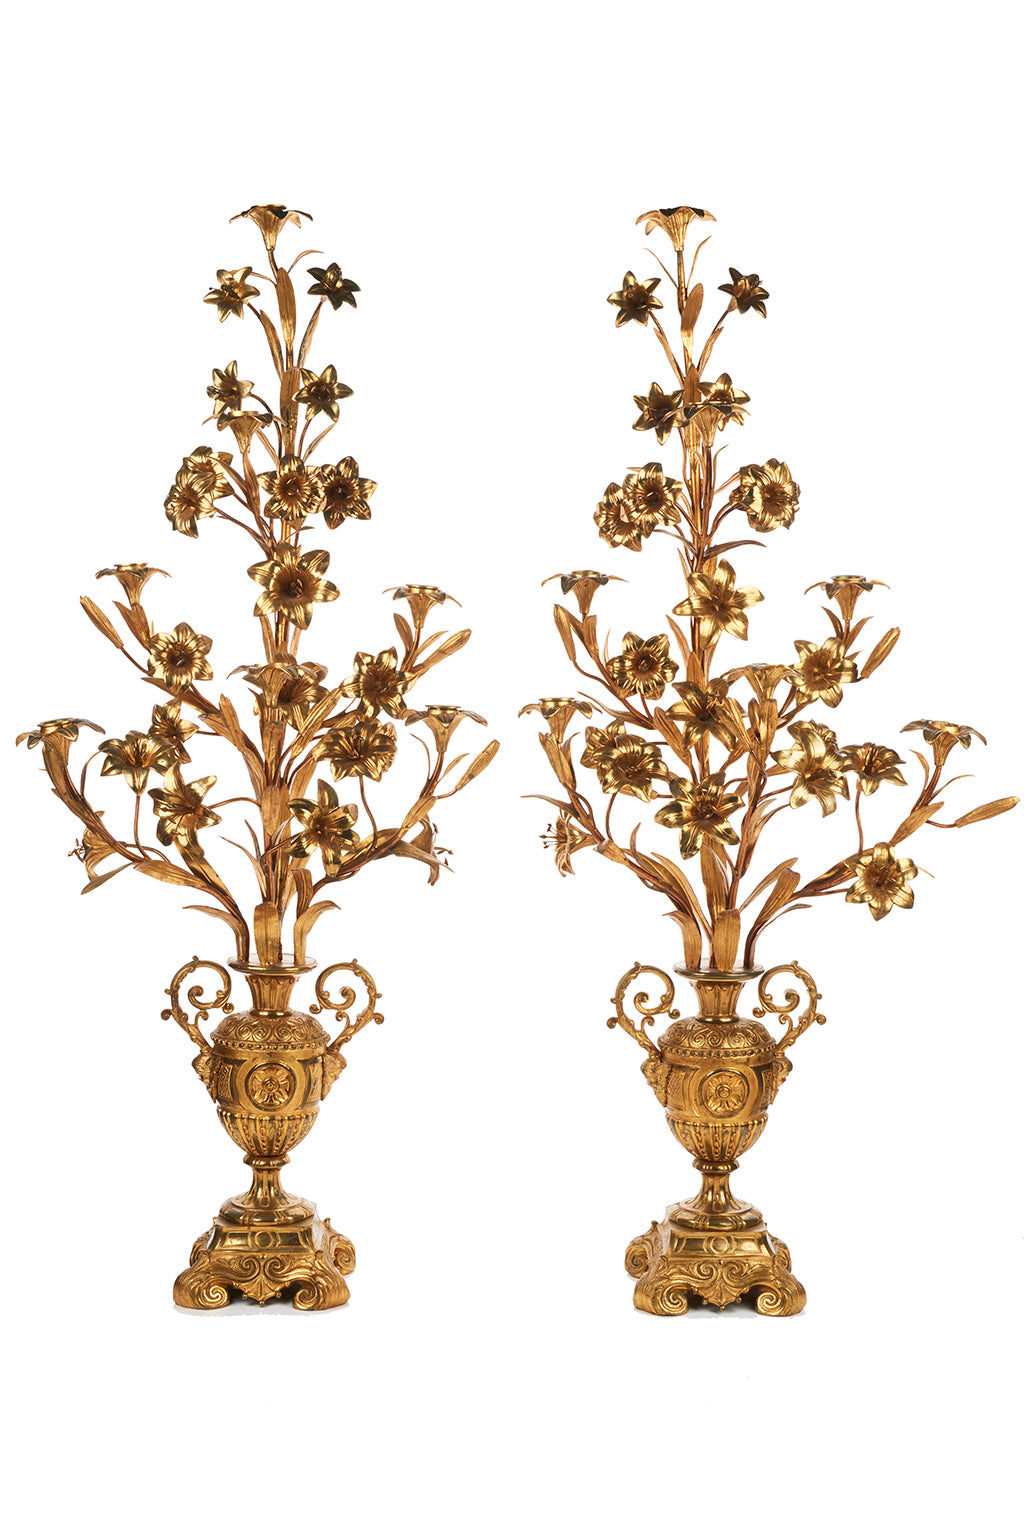 A Pair of French Gilded Bronze Candelabra, Late 19th/ Early 20th Century